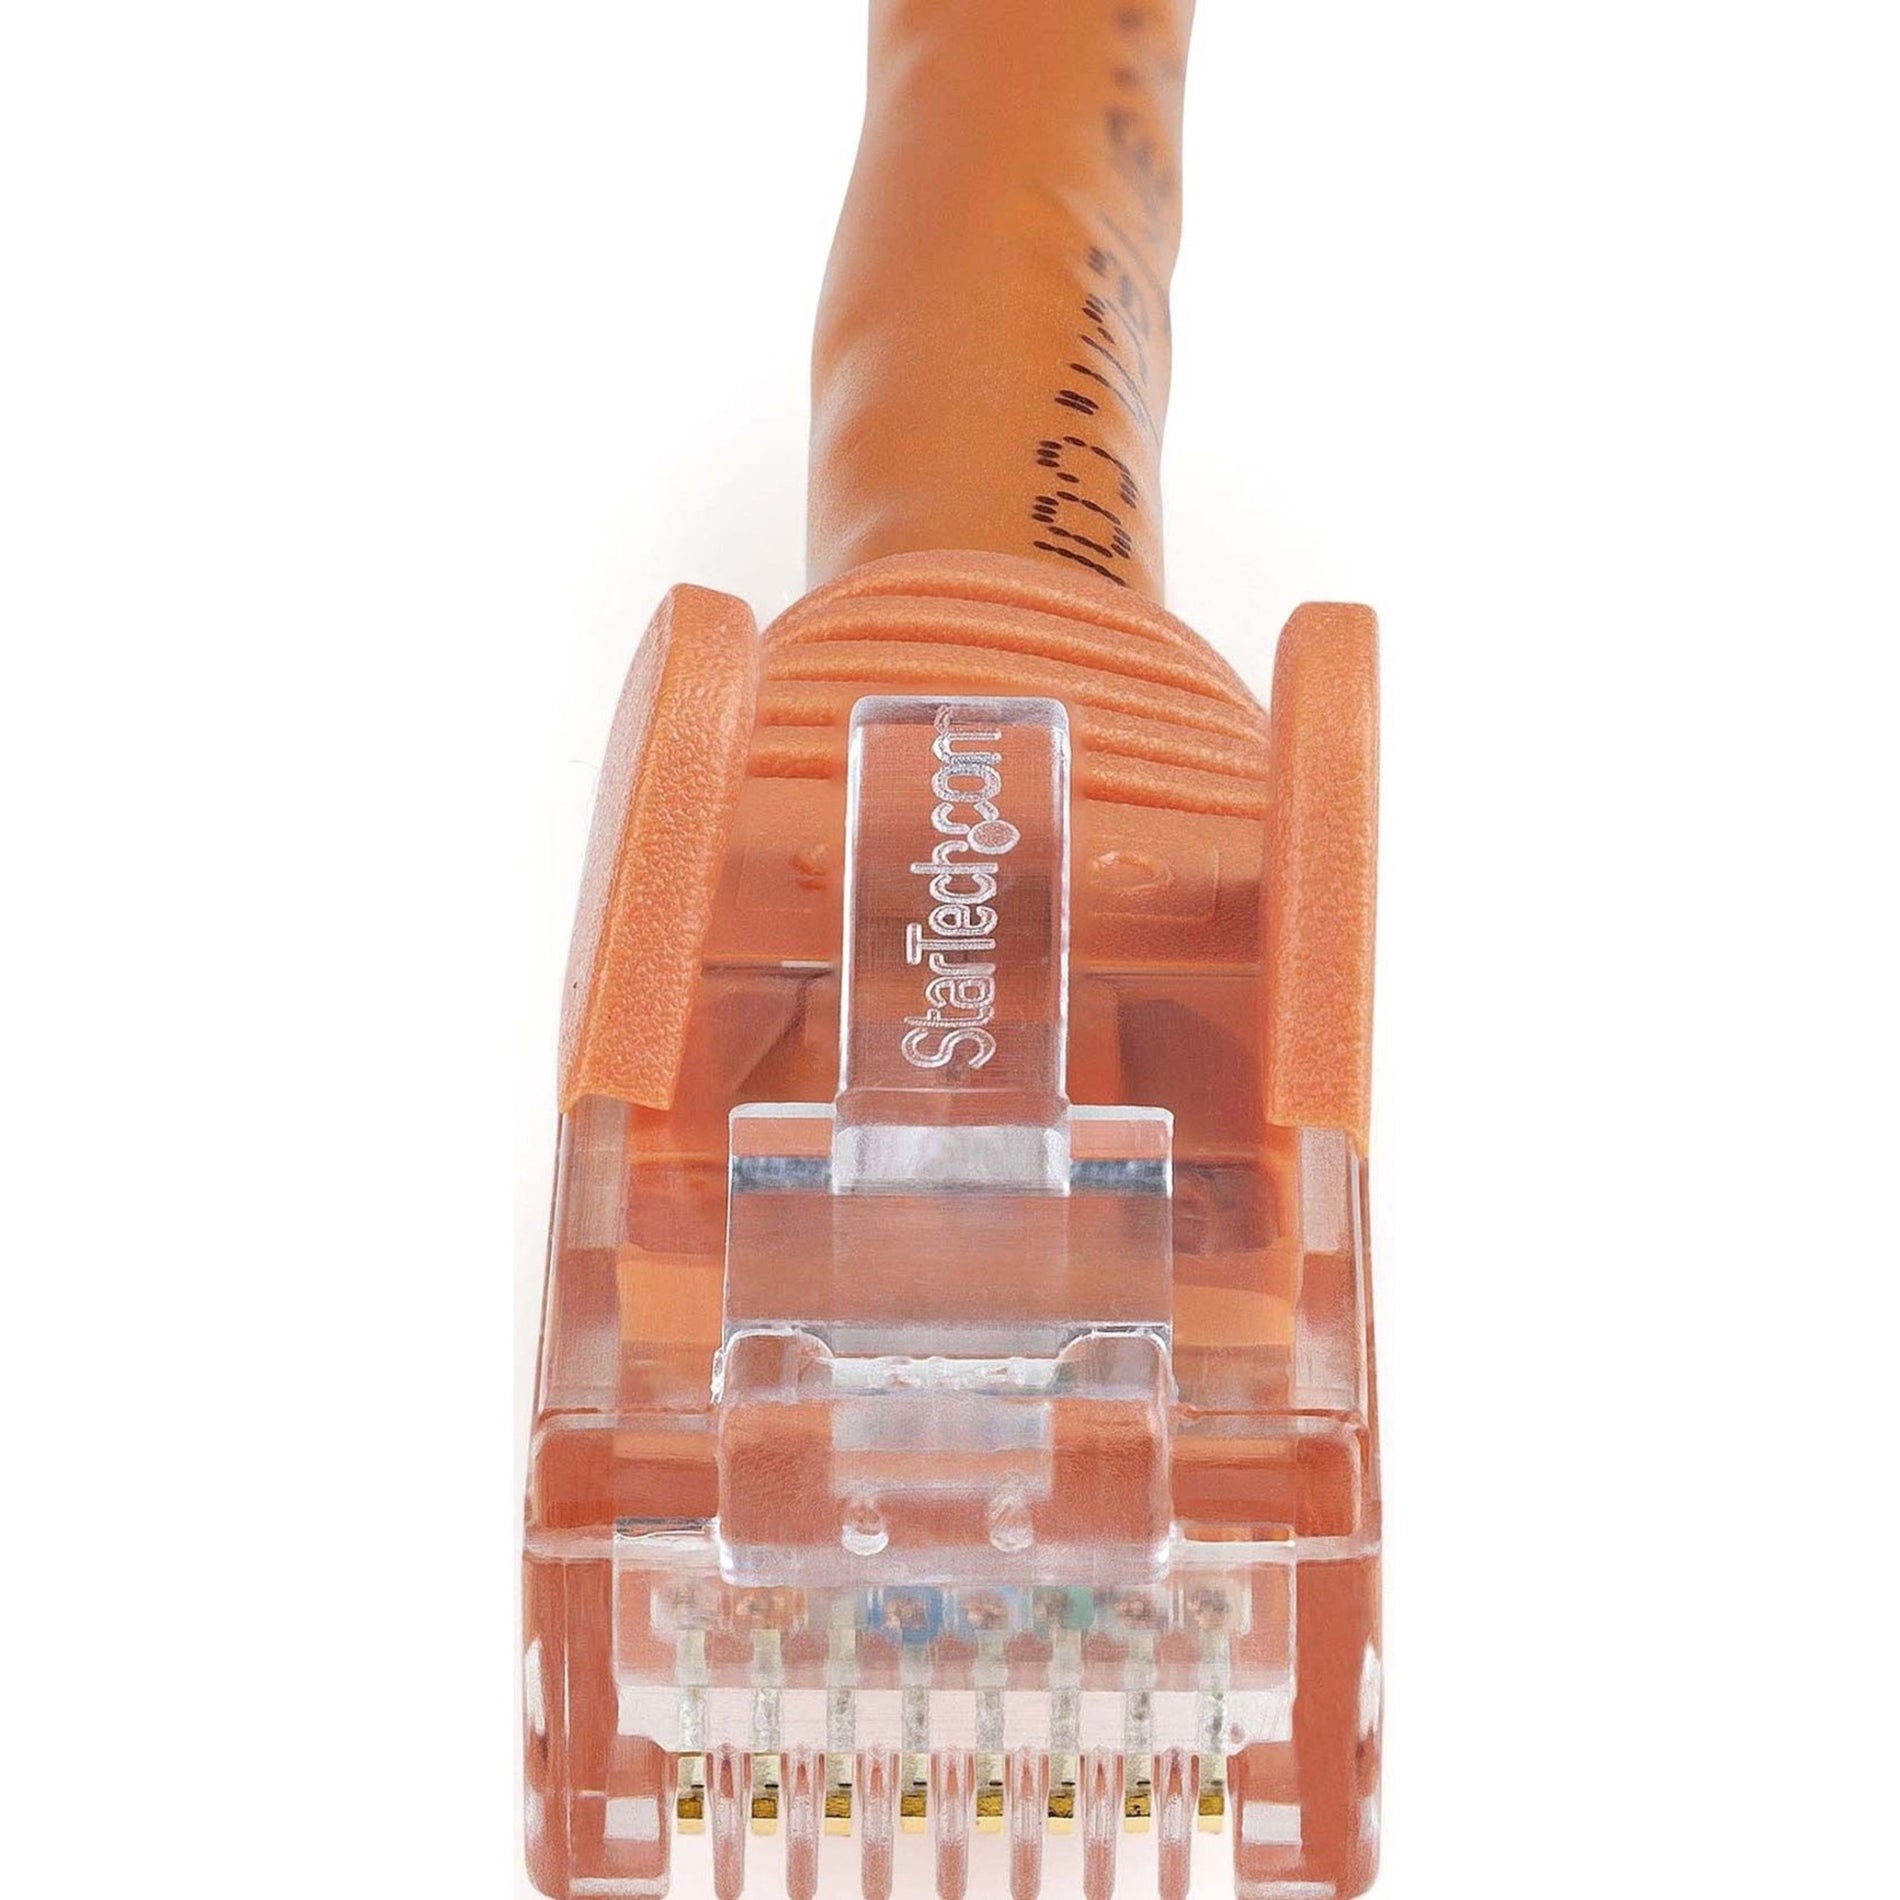 StarTech.com N6PATCH30OR Cat. 6 Network Cable, 30ft Orange Ethernet Cable, Snagless RJ45 Connectors